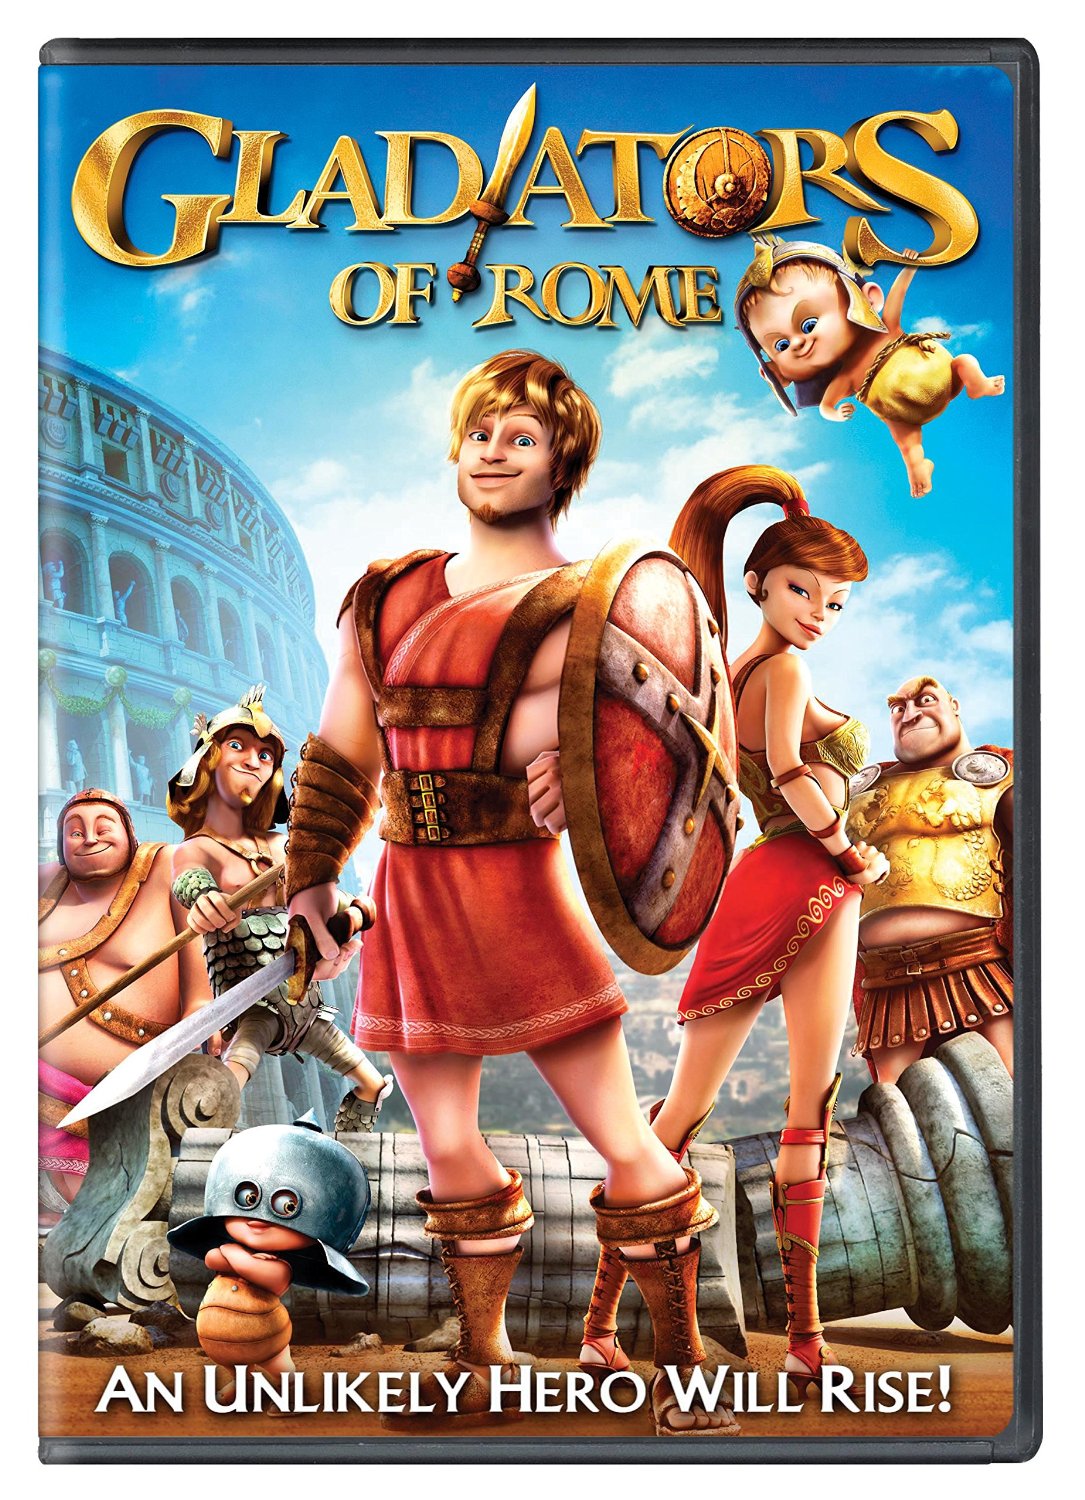 Gladiators of Rome DVD Review